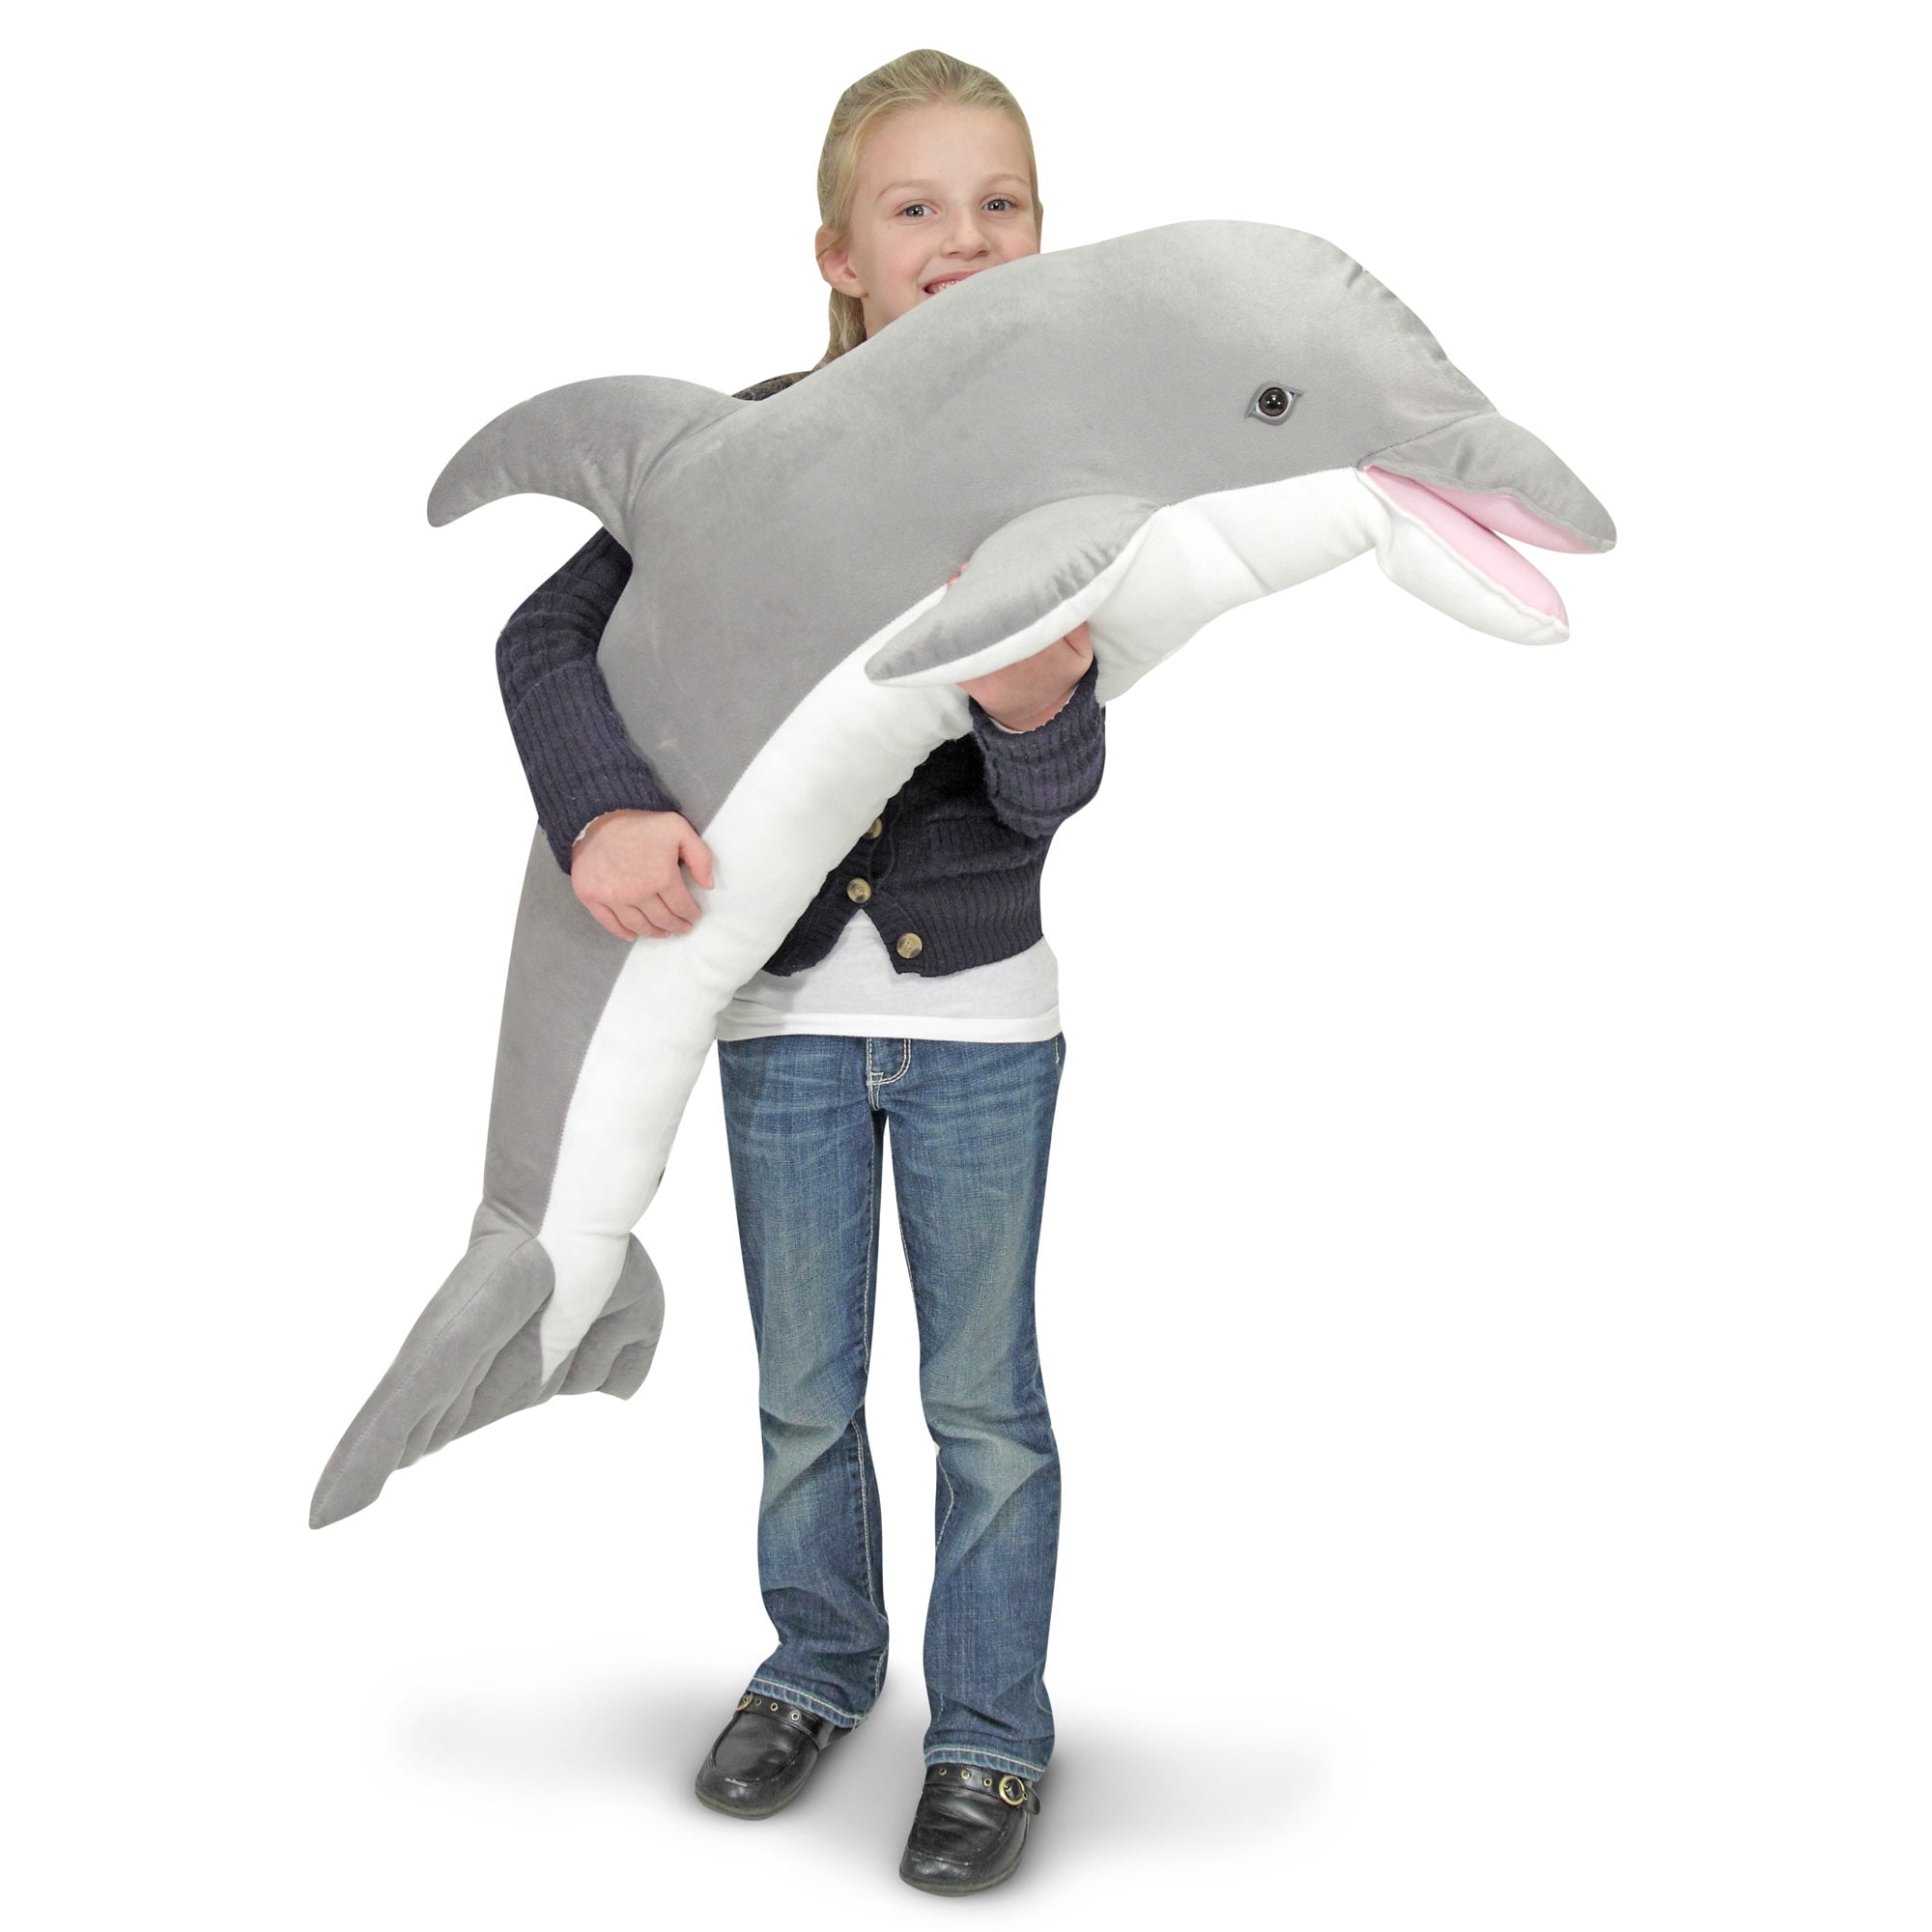 Details about   Giant Big Emulational Dolphin Plush Soft Toys Doll Stuffed Animals Birthday gift 